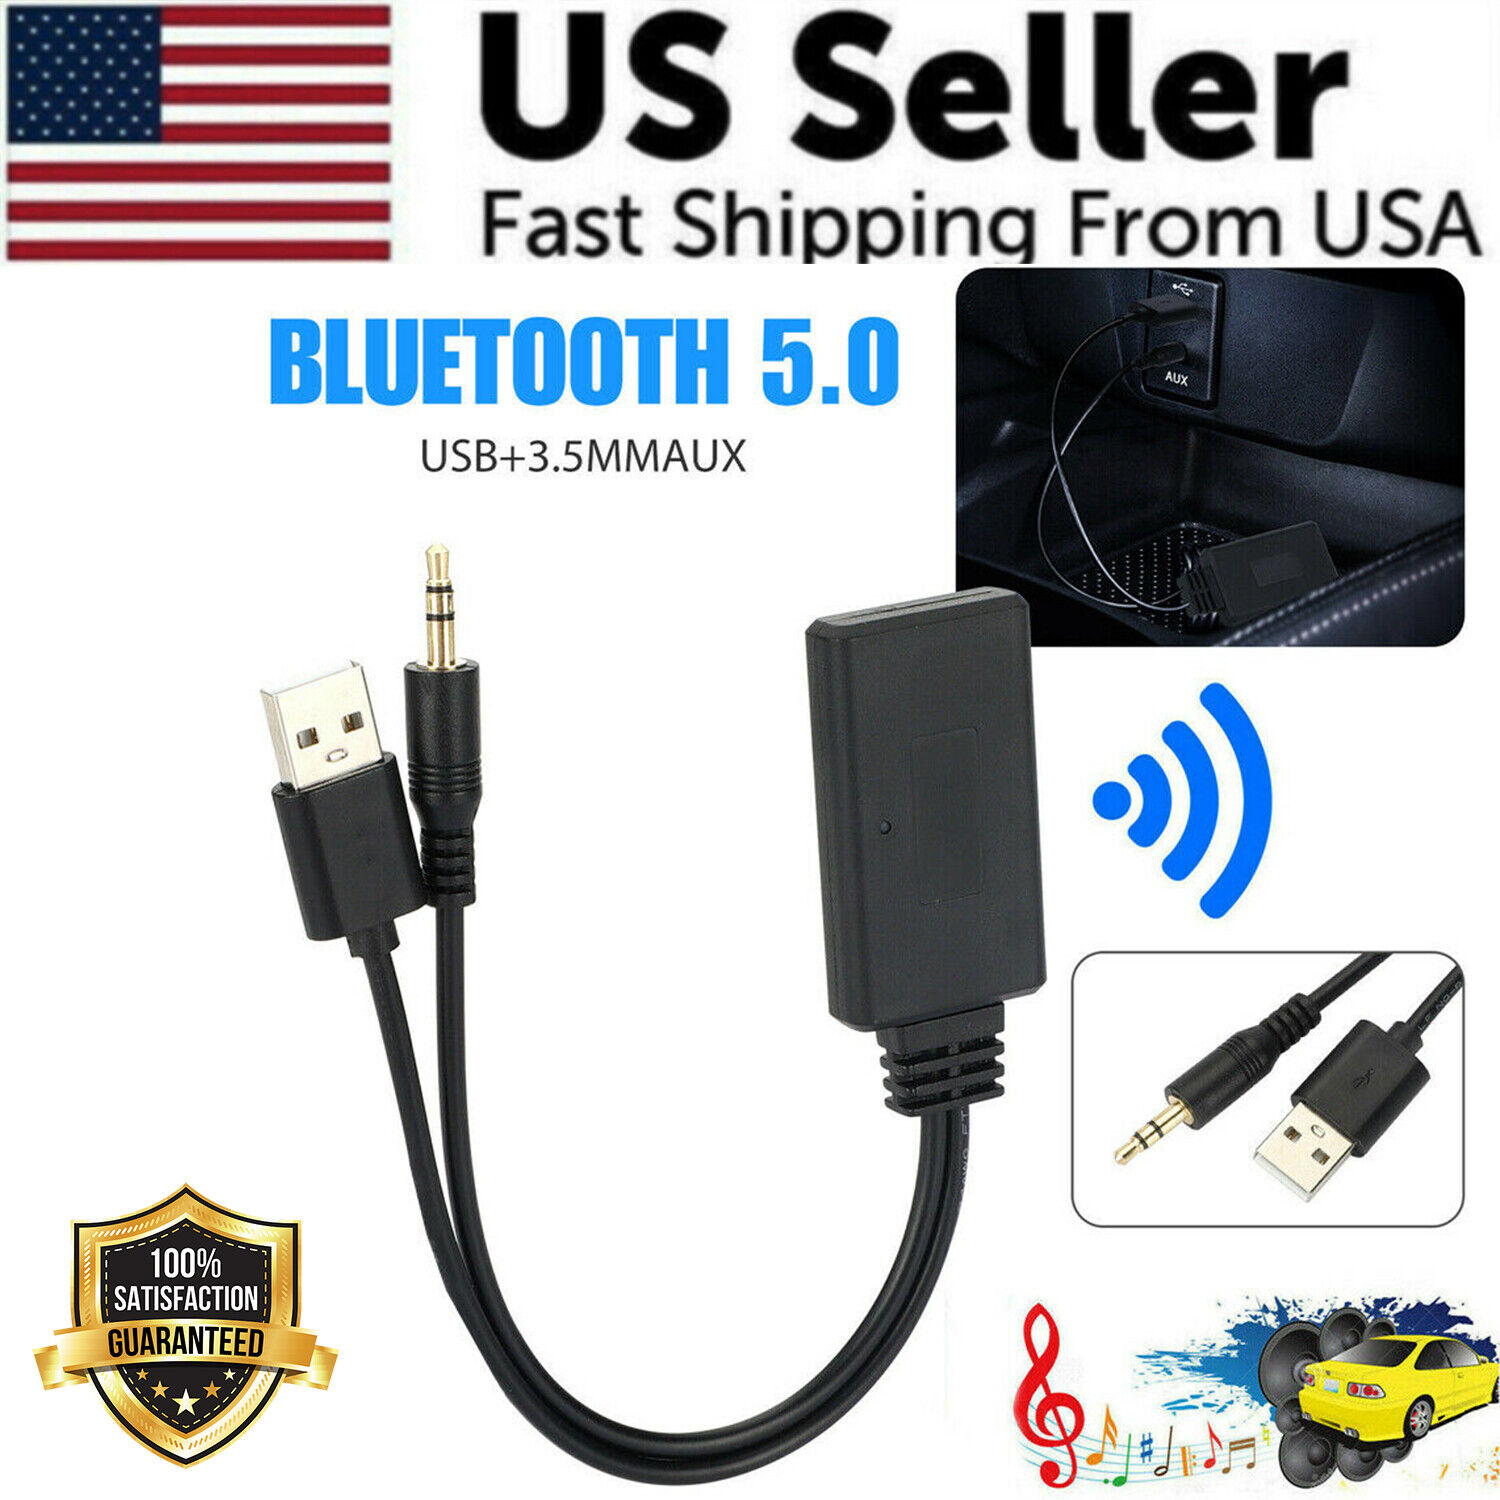 Bluetooth 5.0 Receiver Adapter USB + 3.5mm Jack Stereo Audio For Car AUX Speaker